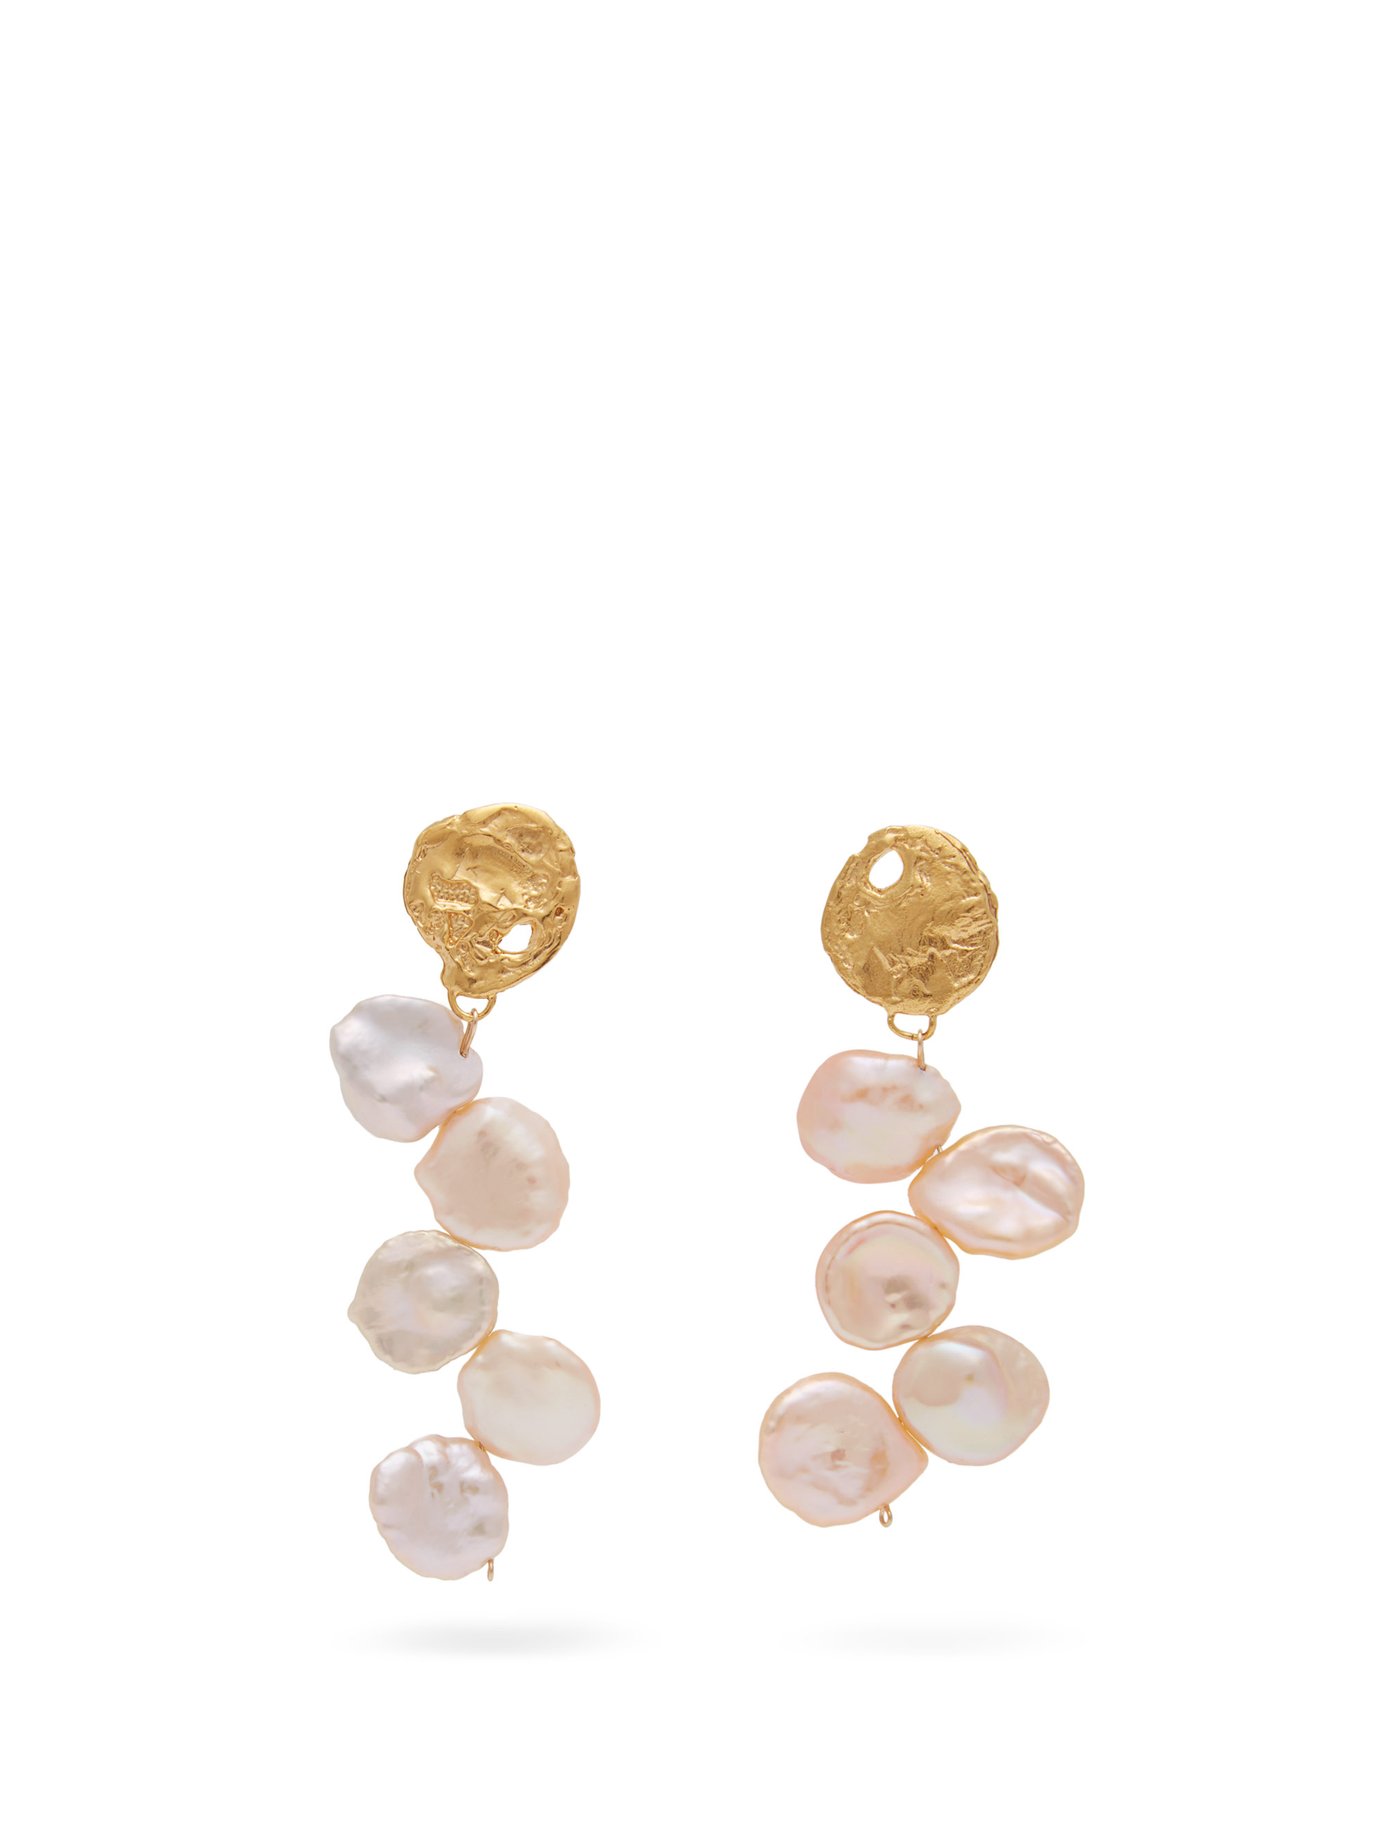 California Dreaming| A Modern Way to Wear Shells and Pearls - the edge ...